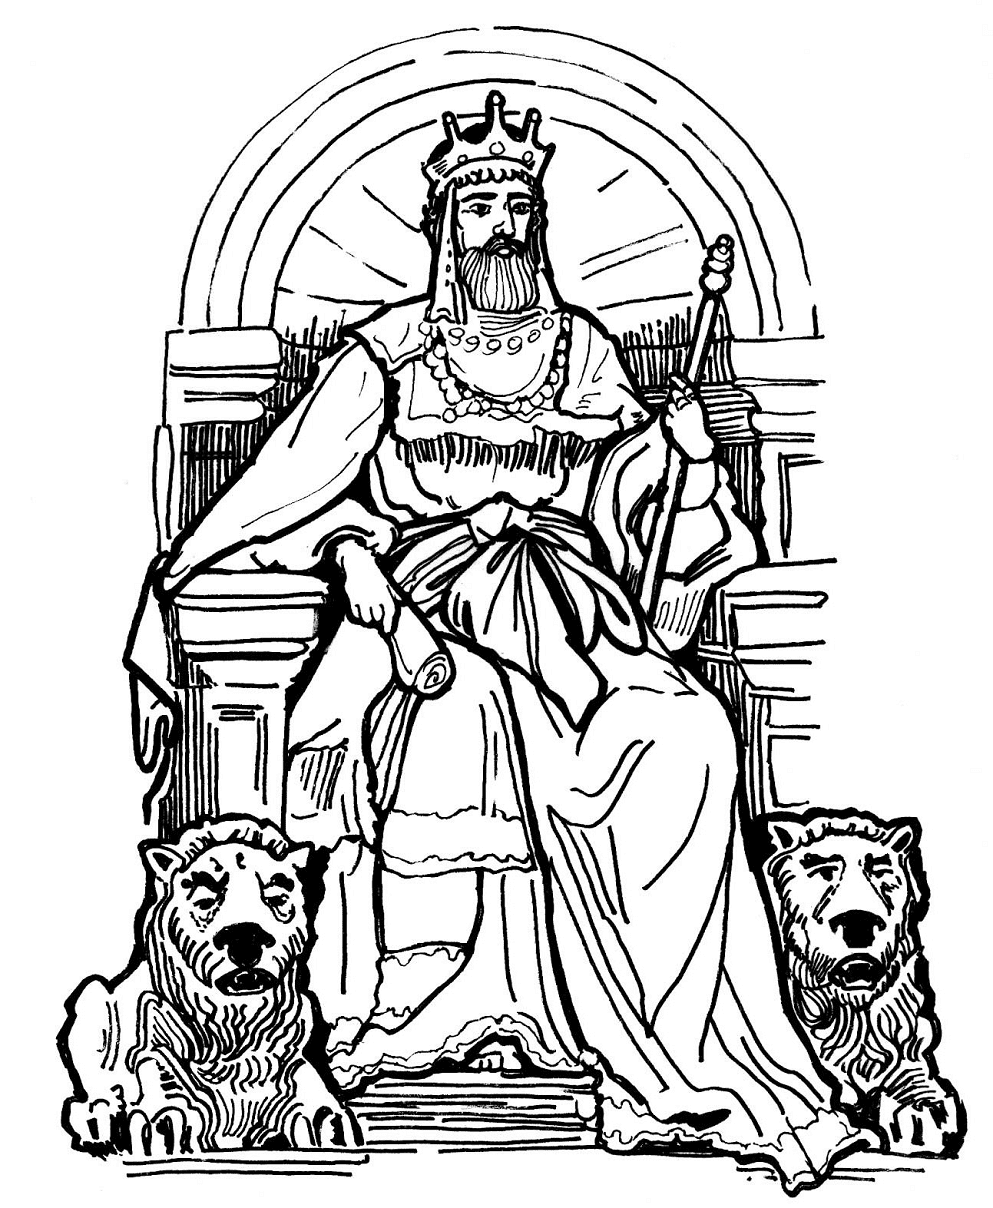 The King On The Throne Coloring Page